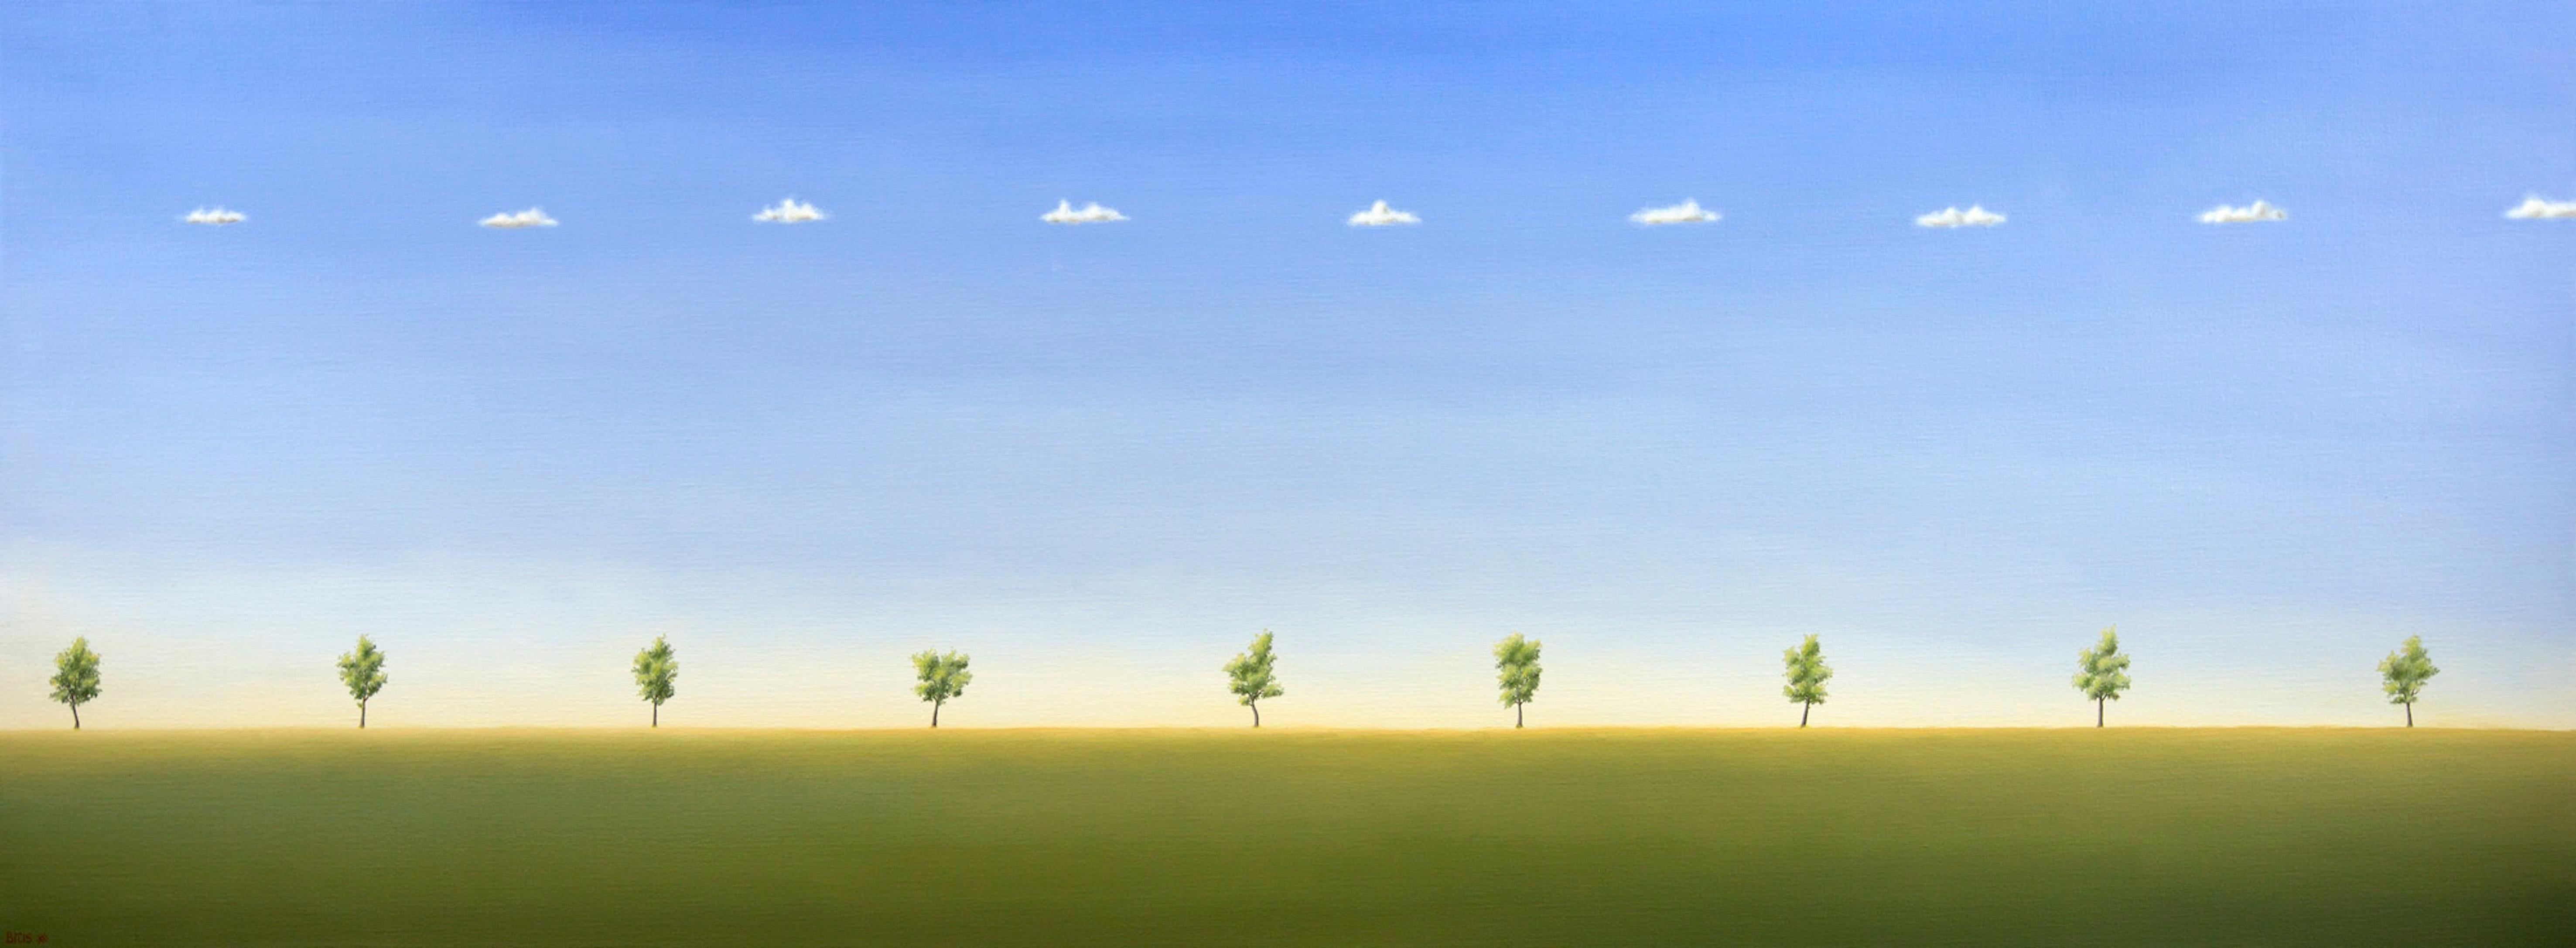 Bert Brus Figurative Painting - Landscaped II - 21st Century Contemporary Oil Painting of Trees and Blue Sky